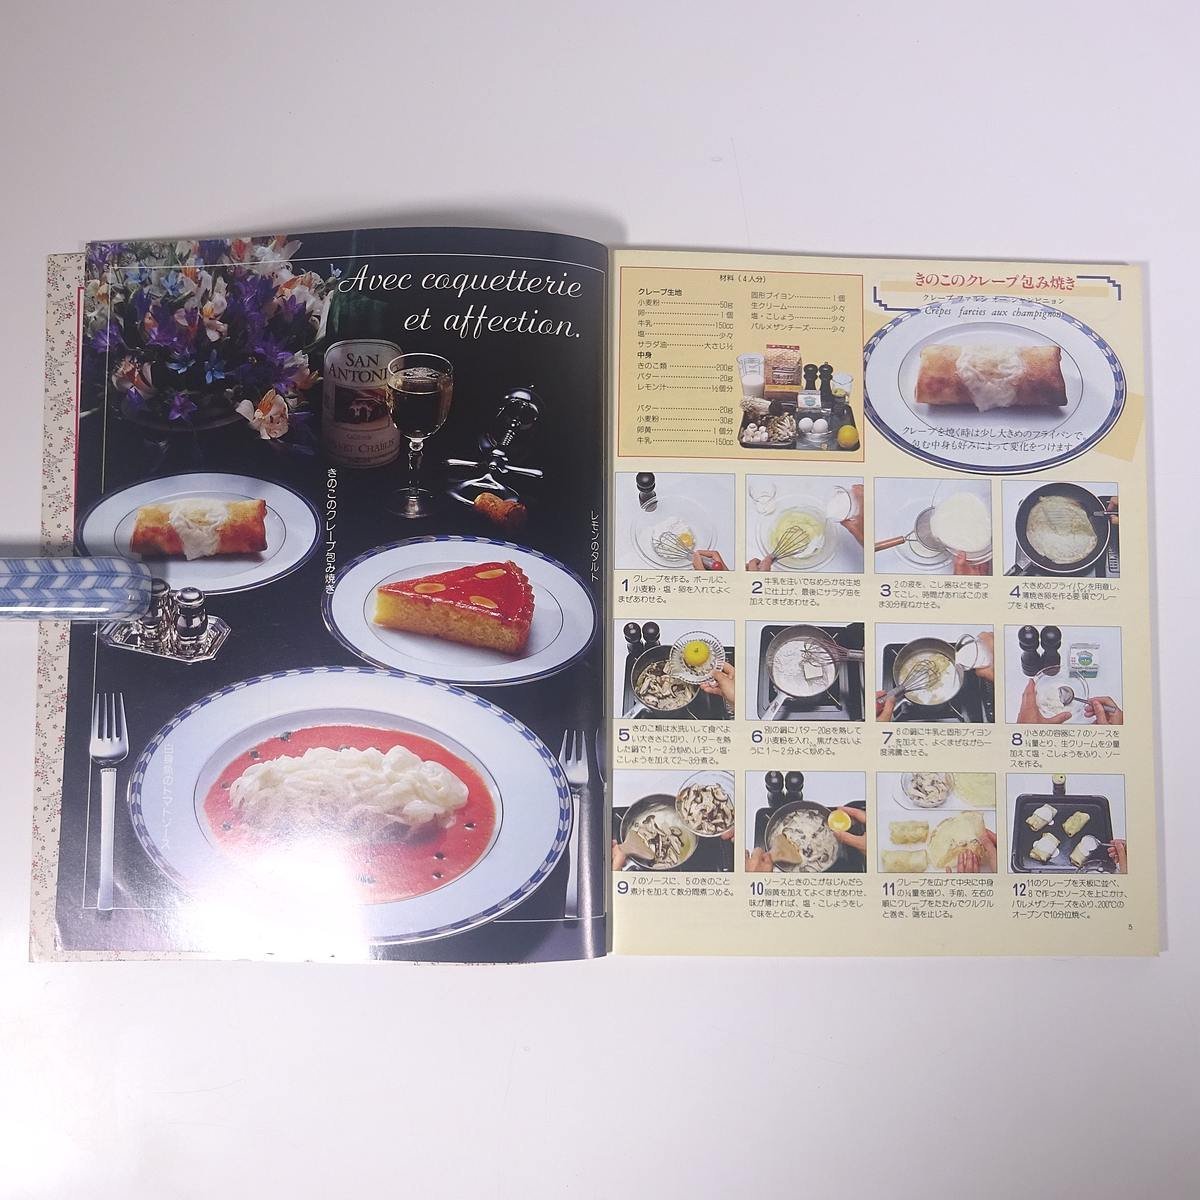  you also is possible simple France home cookin do- tray * Jack work btik company 1991 large book@ cooking .. recipe French food home cookin 